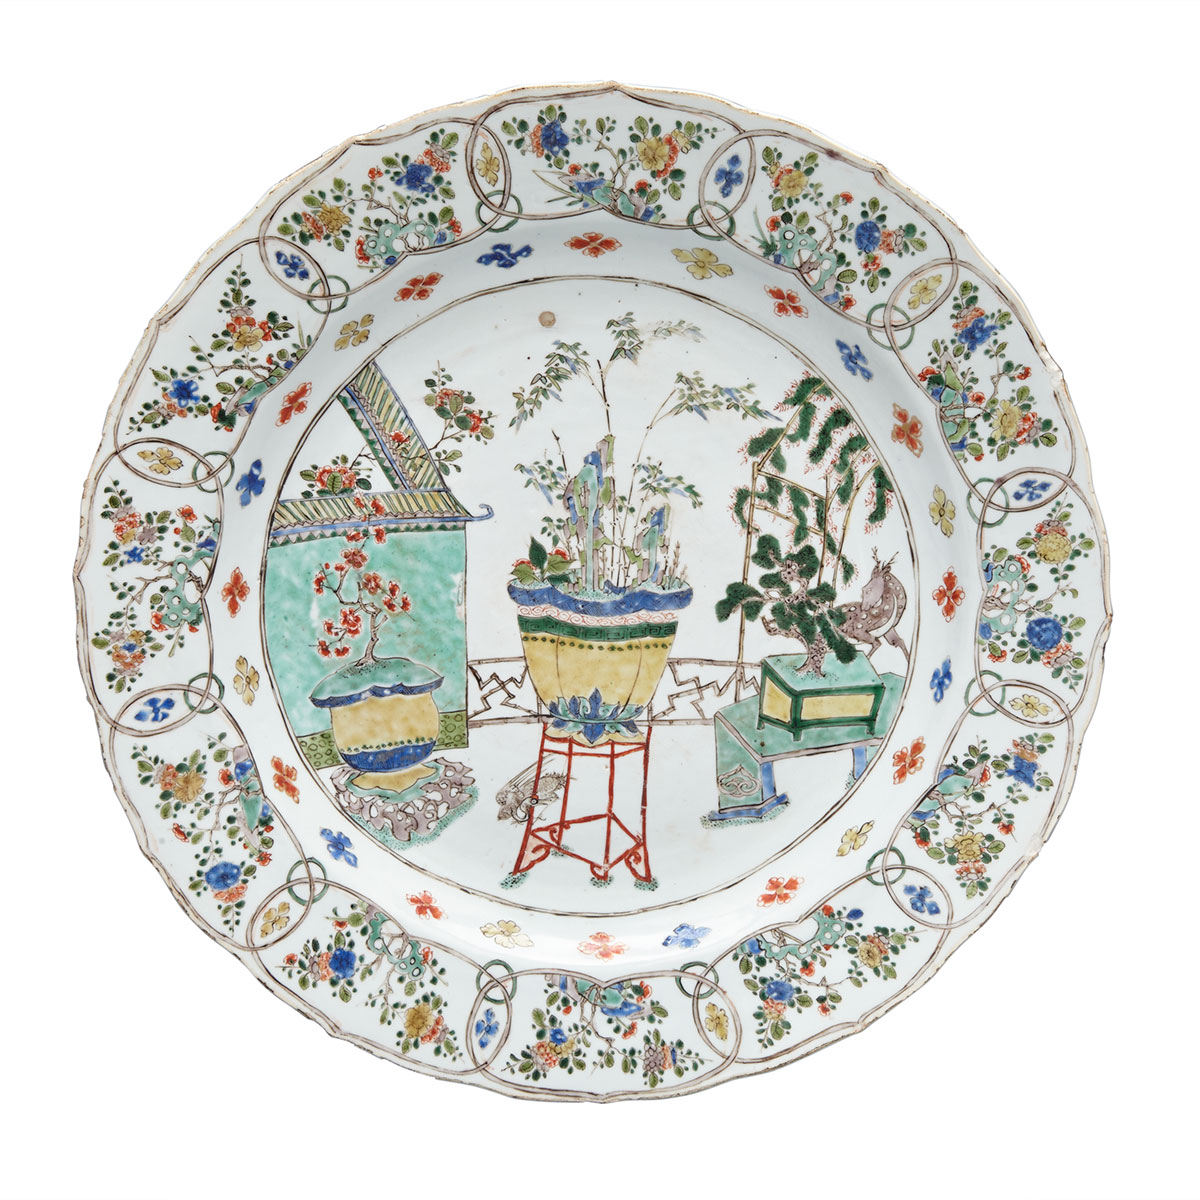 Large Export Famille Verte ‘Three Friends’ Charger, Kangxi Period (1662-1722)